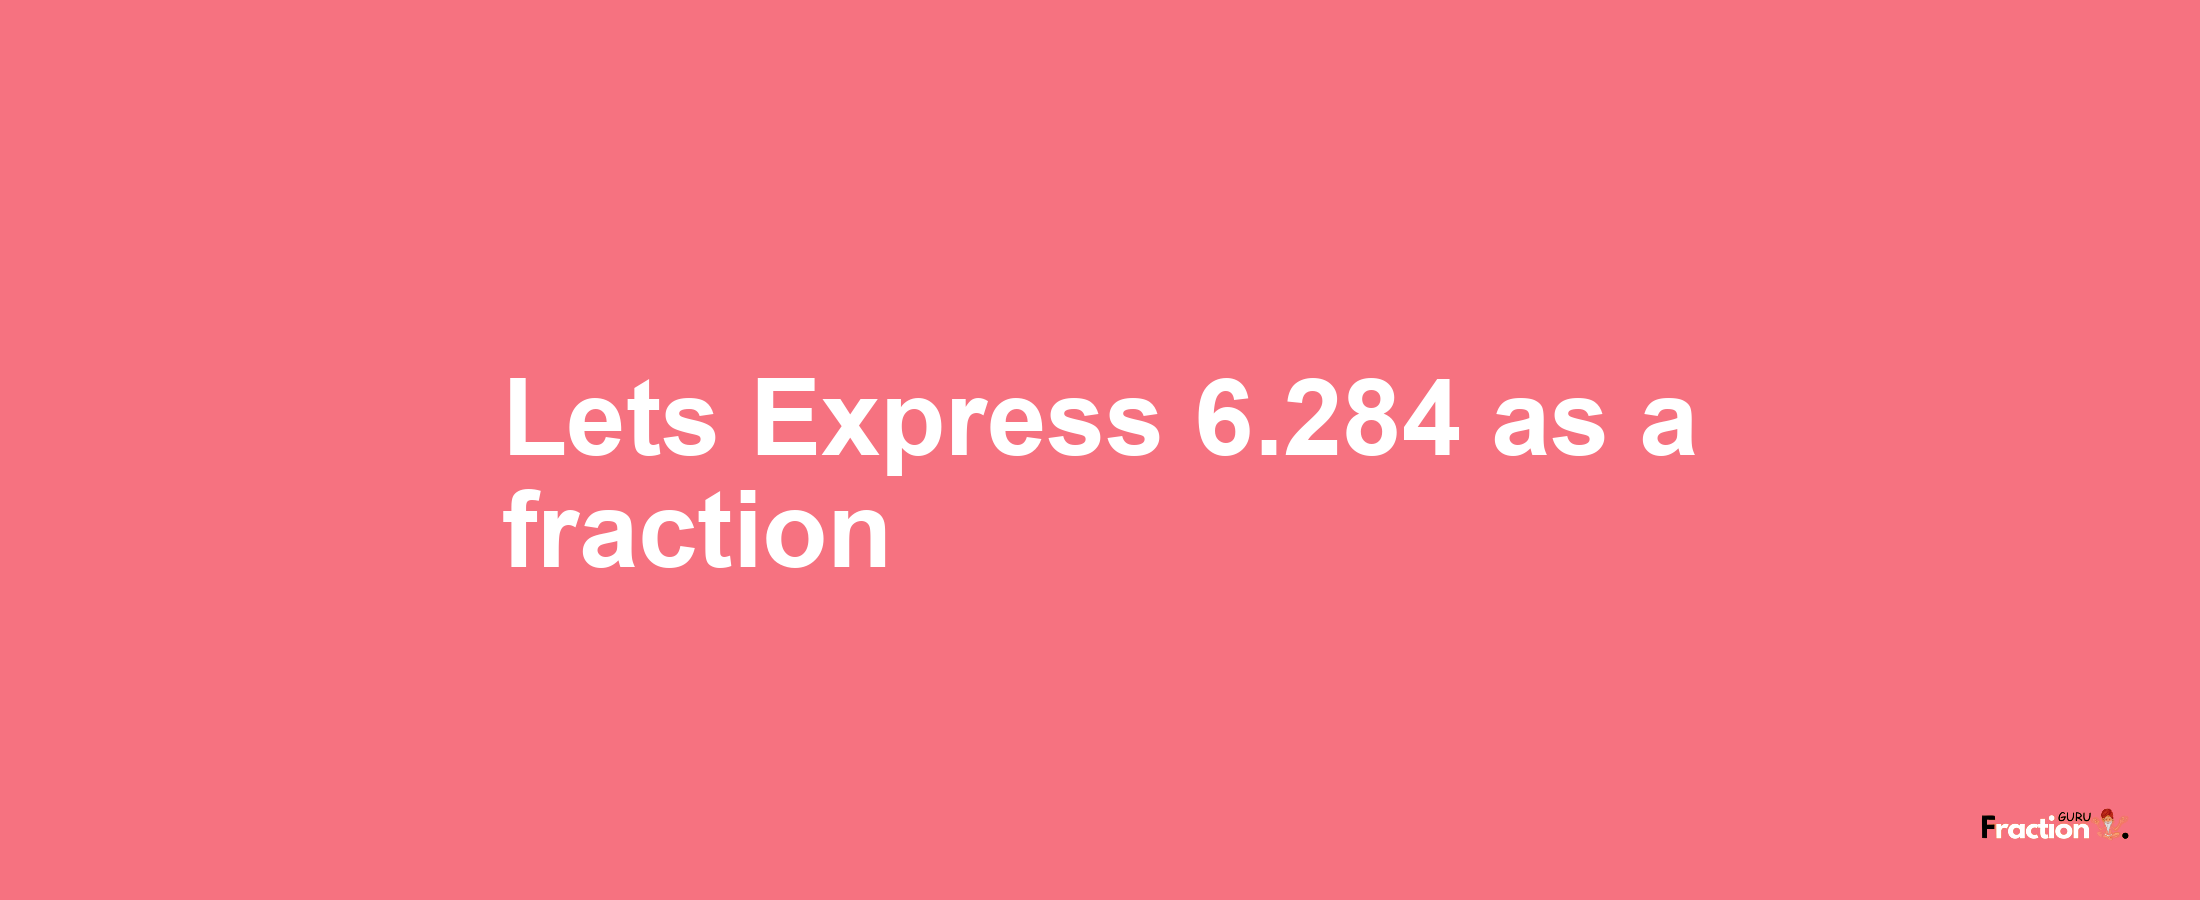 Lets Express 6.284 as afraction